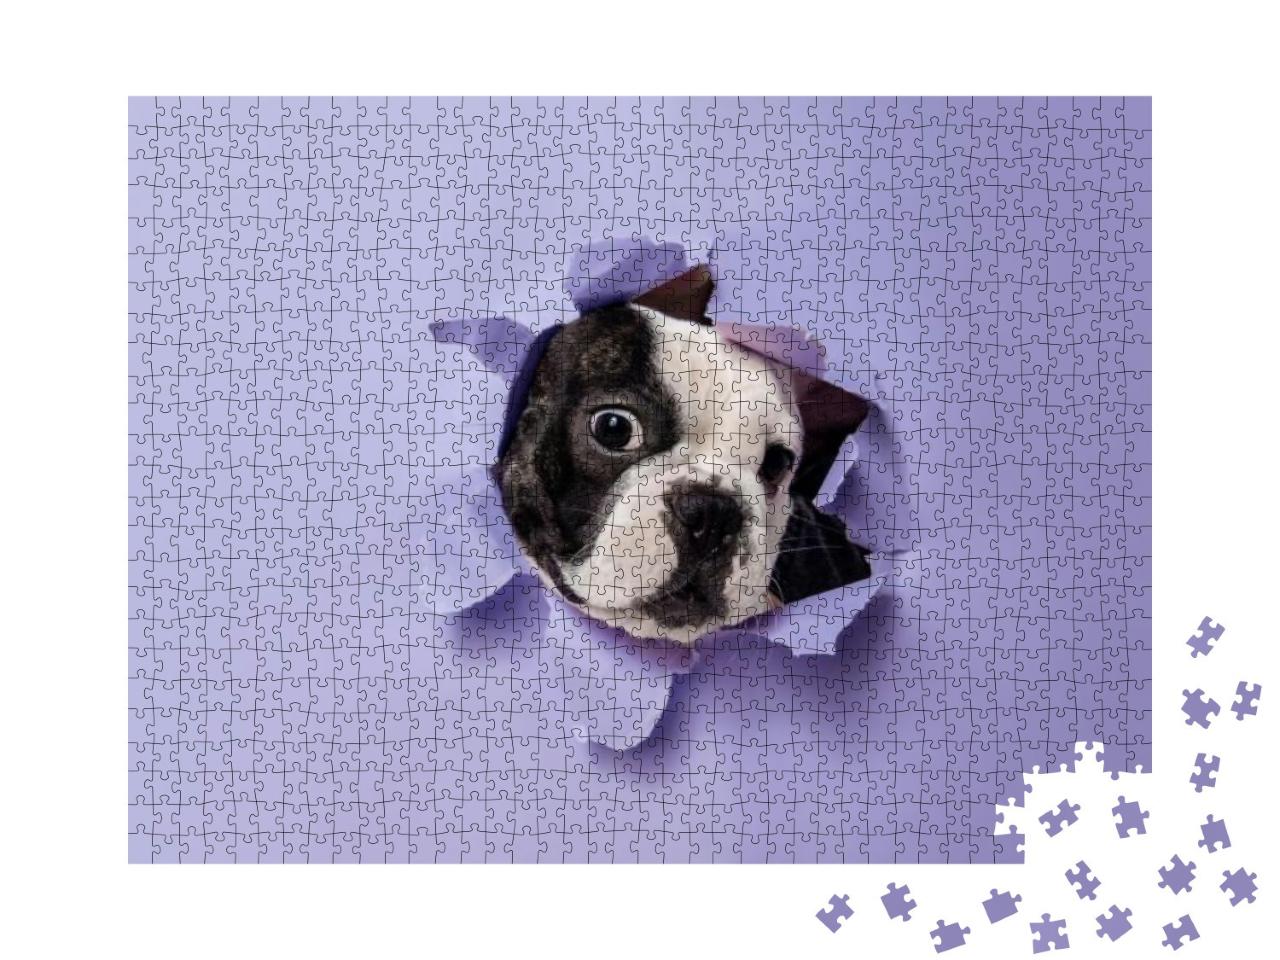 Break Through. French Bulldog Young Dog is Posing. Cute P... Jigsaw Puzzle with 1000 pieces